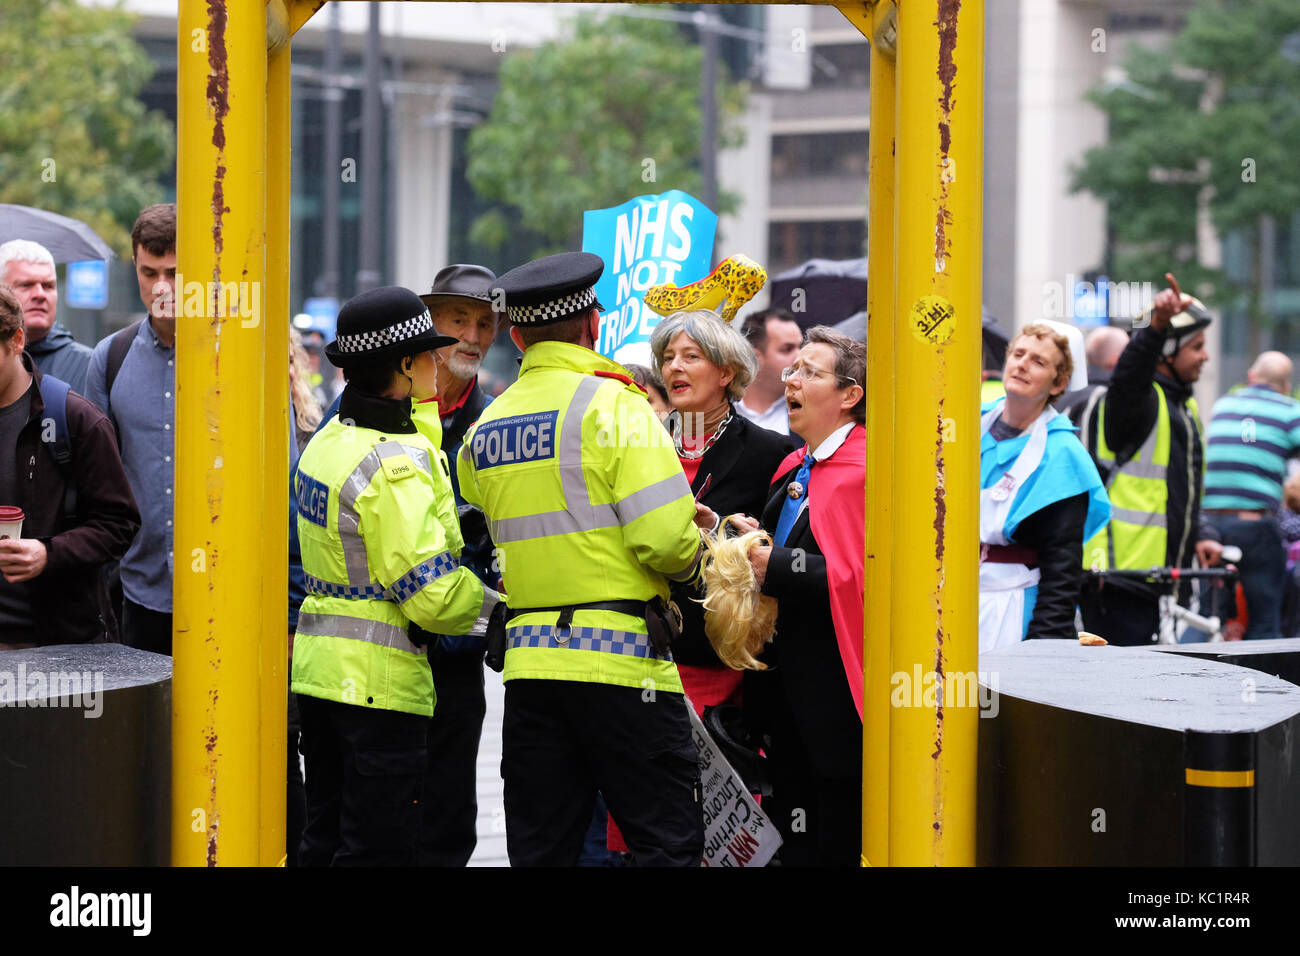 Manchester, UK. 1st October, 2017. Conservative Party Conference, Manchester UK, Sunday 1st October 2017 - A protester dressed to look like Theresa May talks with police before entering the zone in front of the Midland Hotel in the city centre on the opening day of the Conservative Party Conference. Credit: Steven May/Alamy Live News Stock Photo